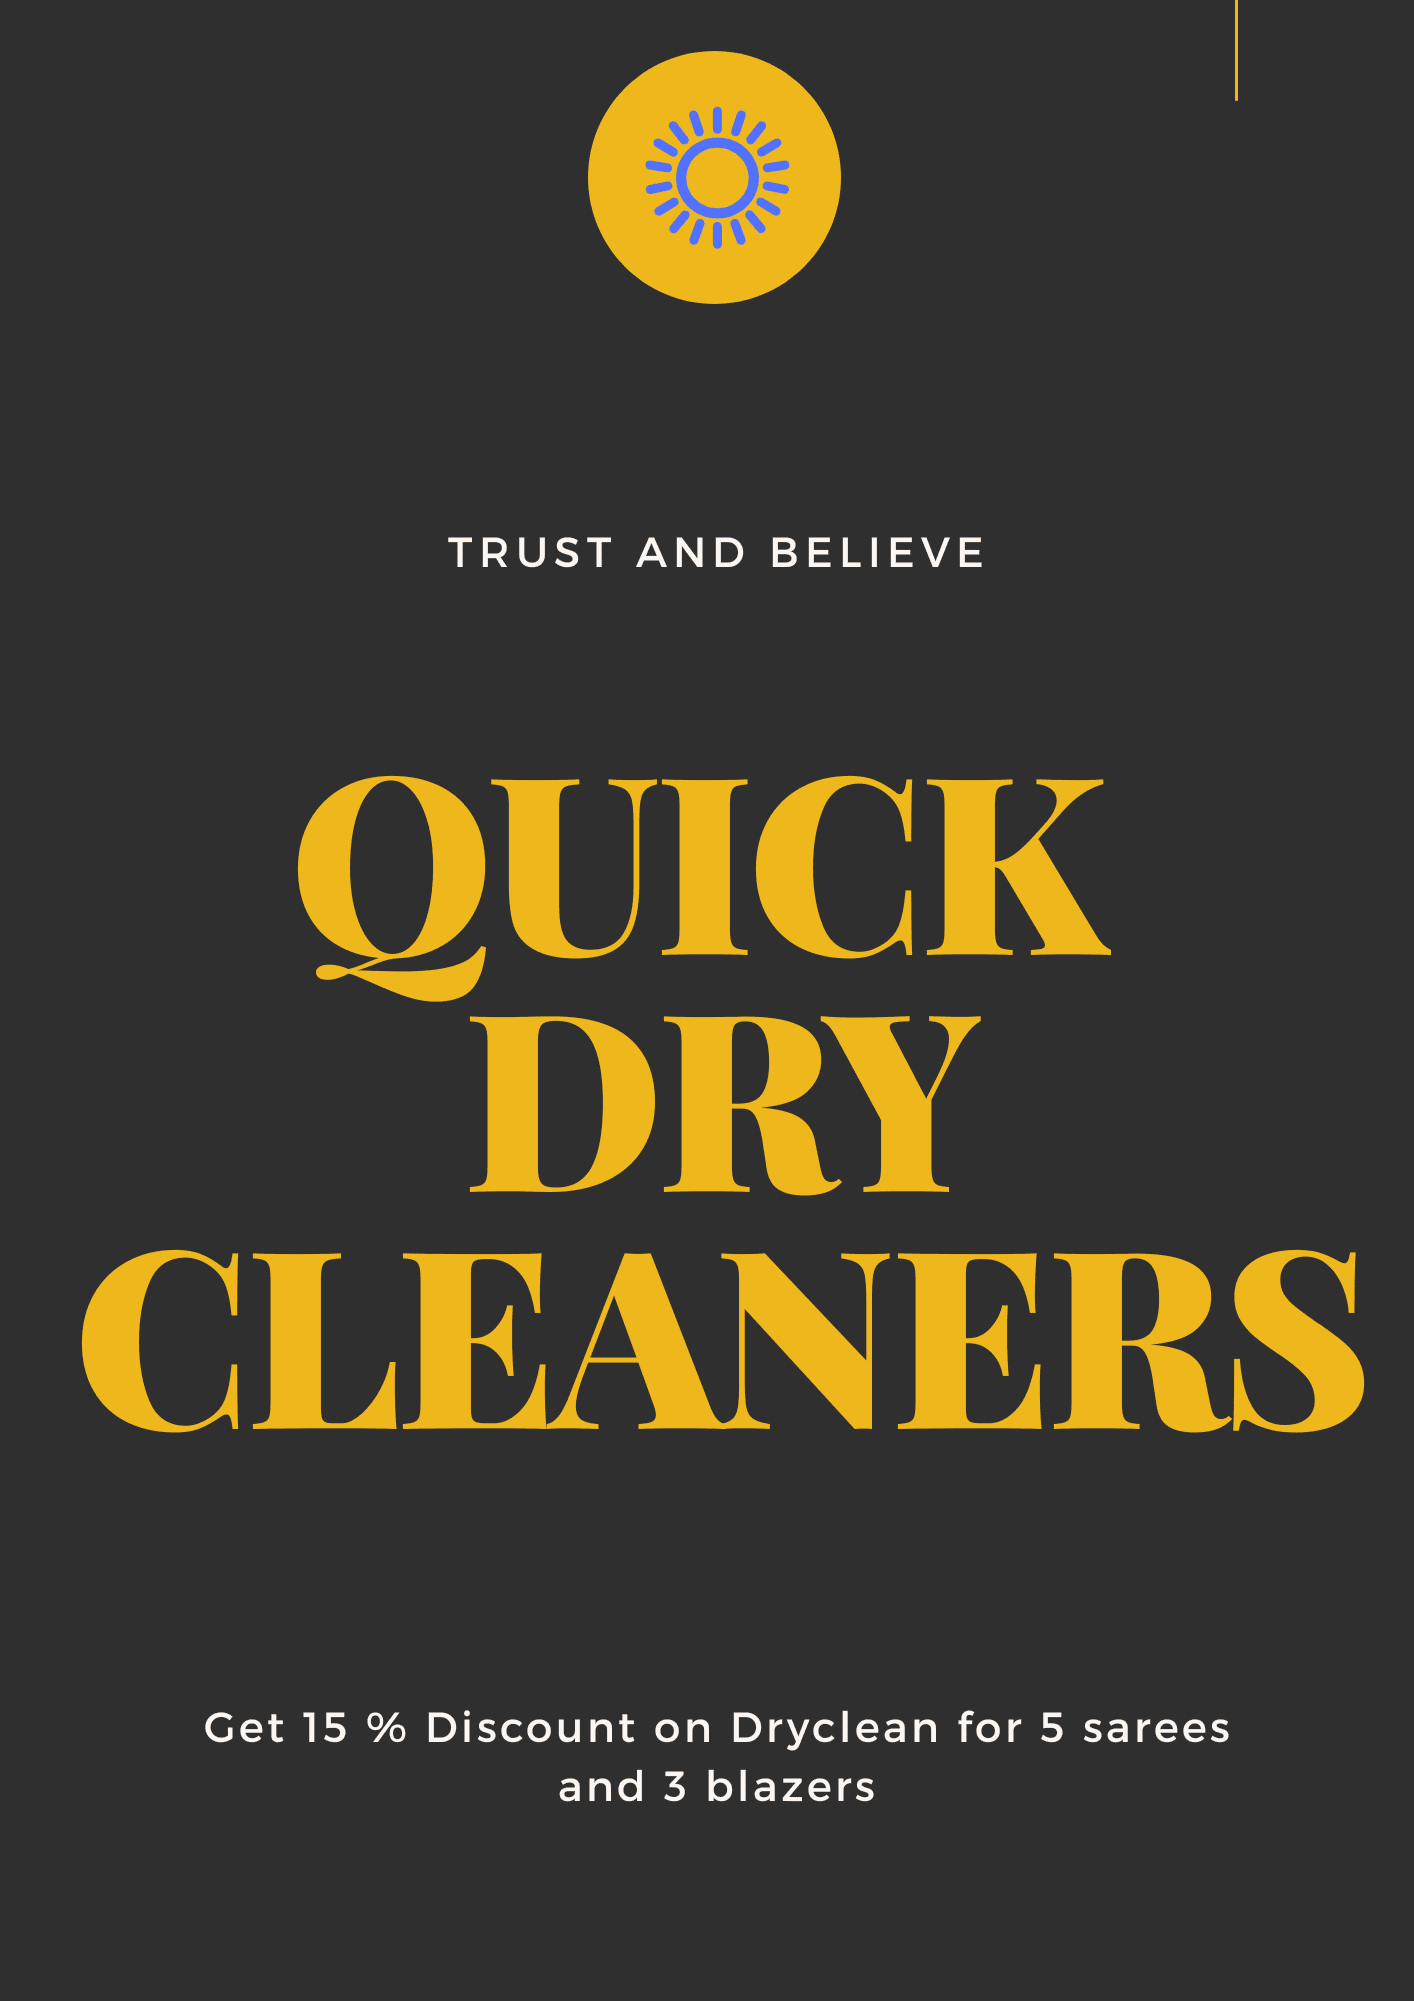 QUICK DRYCLEANERS